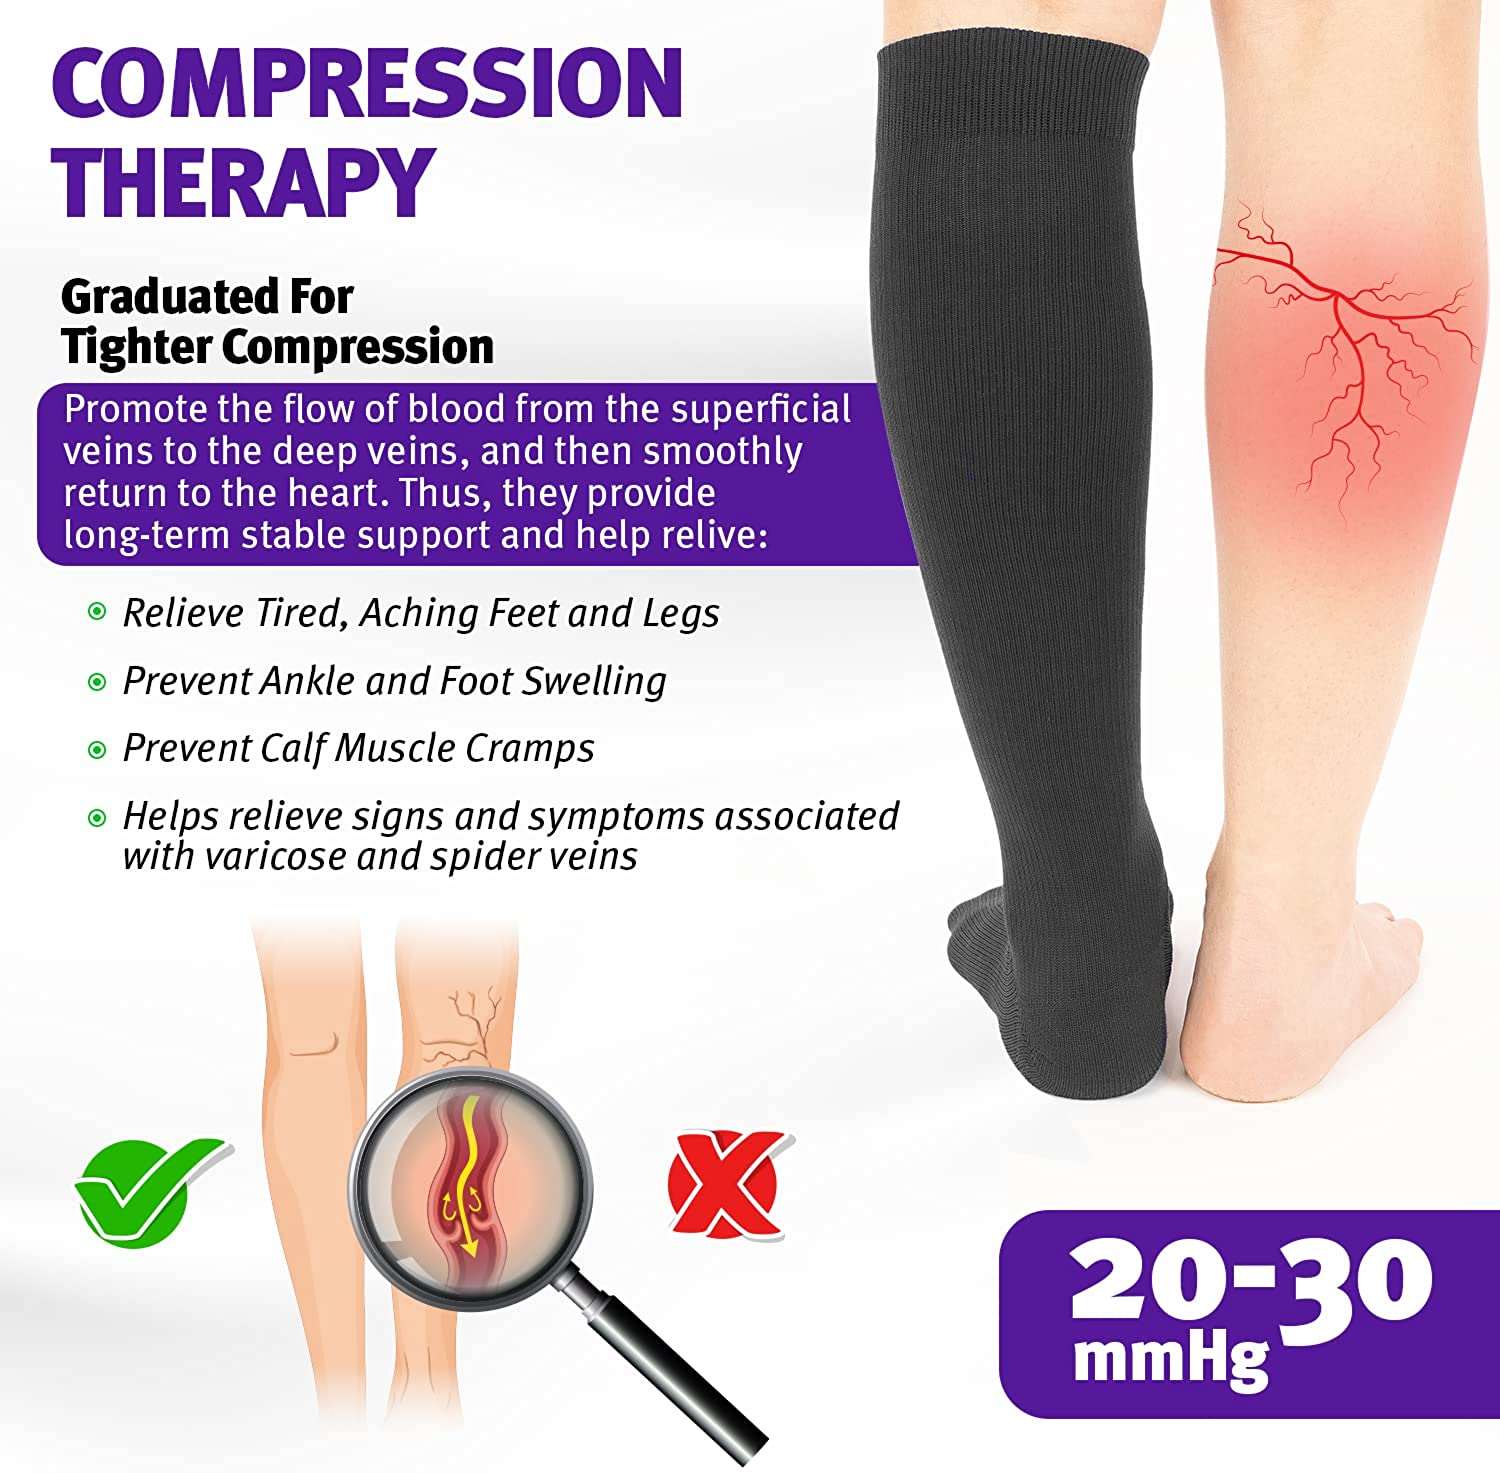 3 Pairs Knee High Graduated Compression Socks for Men & Women - BEST  Stockings for Running, Medical, Athletic, Diabetic, Swelling, Varicose  Veins